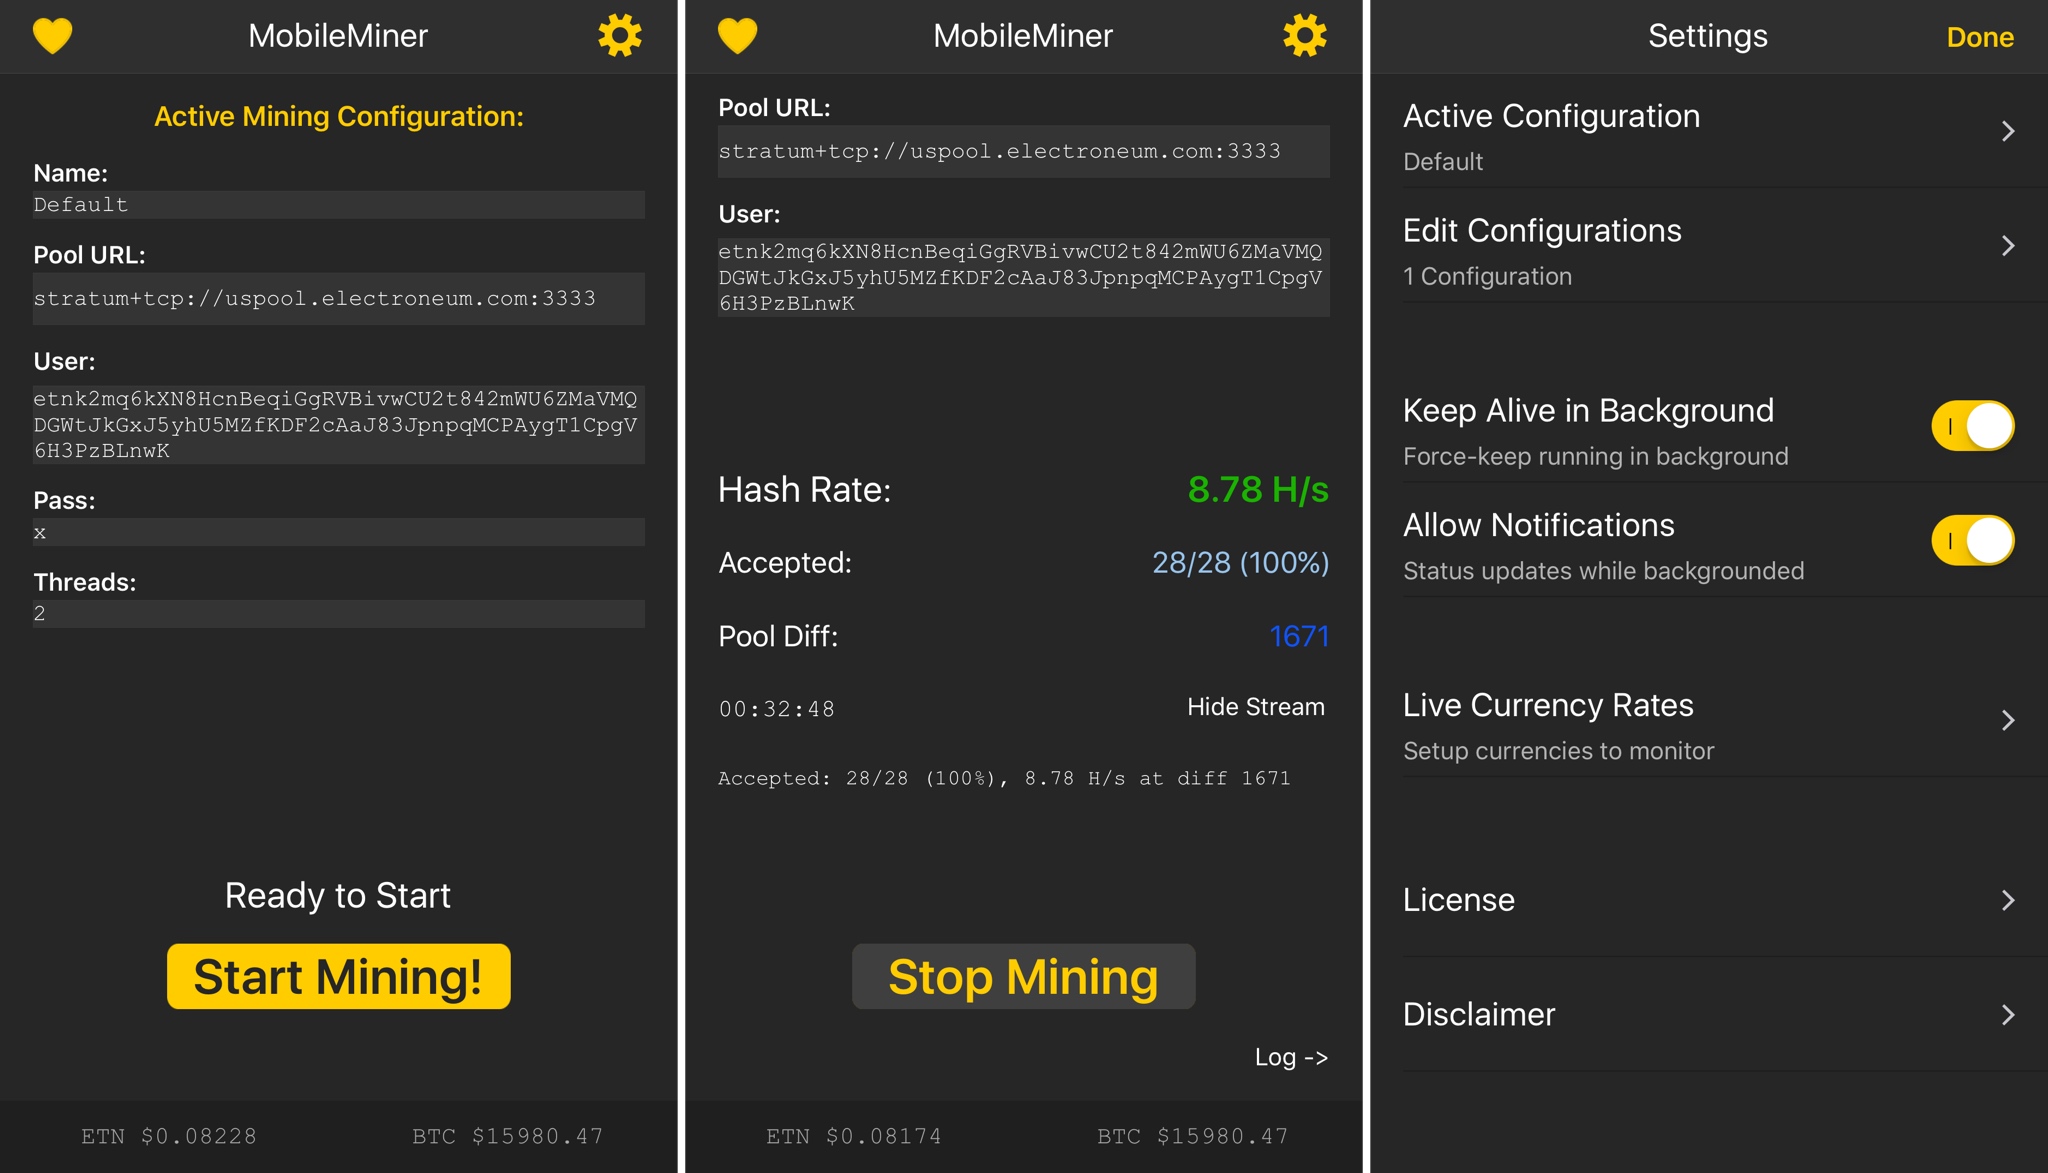 Apple has stopped accepting cryptocurrency mining apps on both App Store and Mac App Store